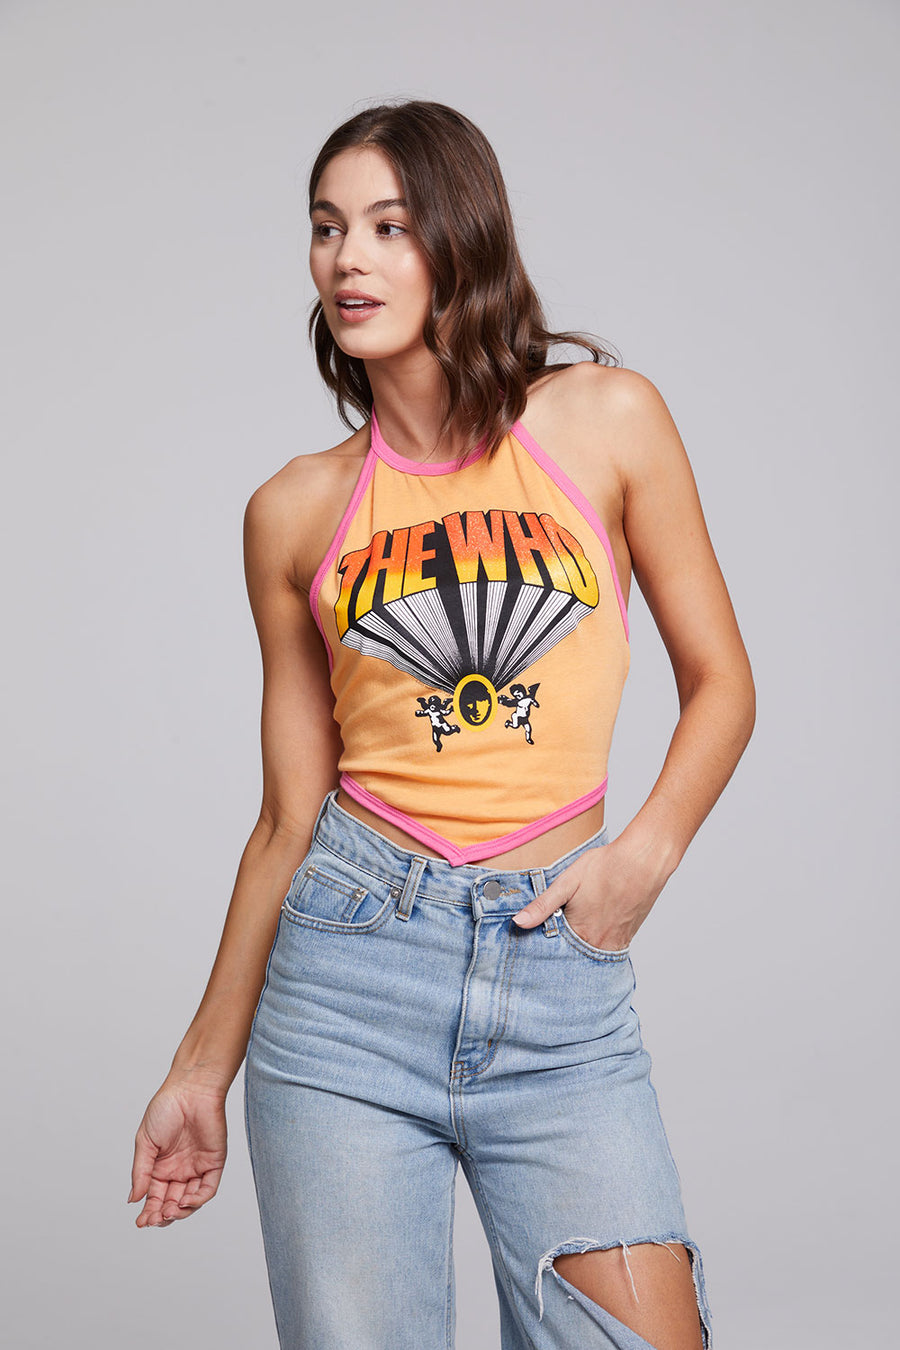 The Who Keith Moon Wallflower Halter Top WOMENS chaserbrand